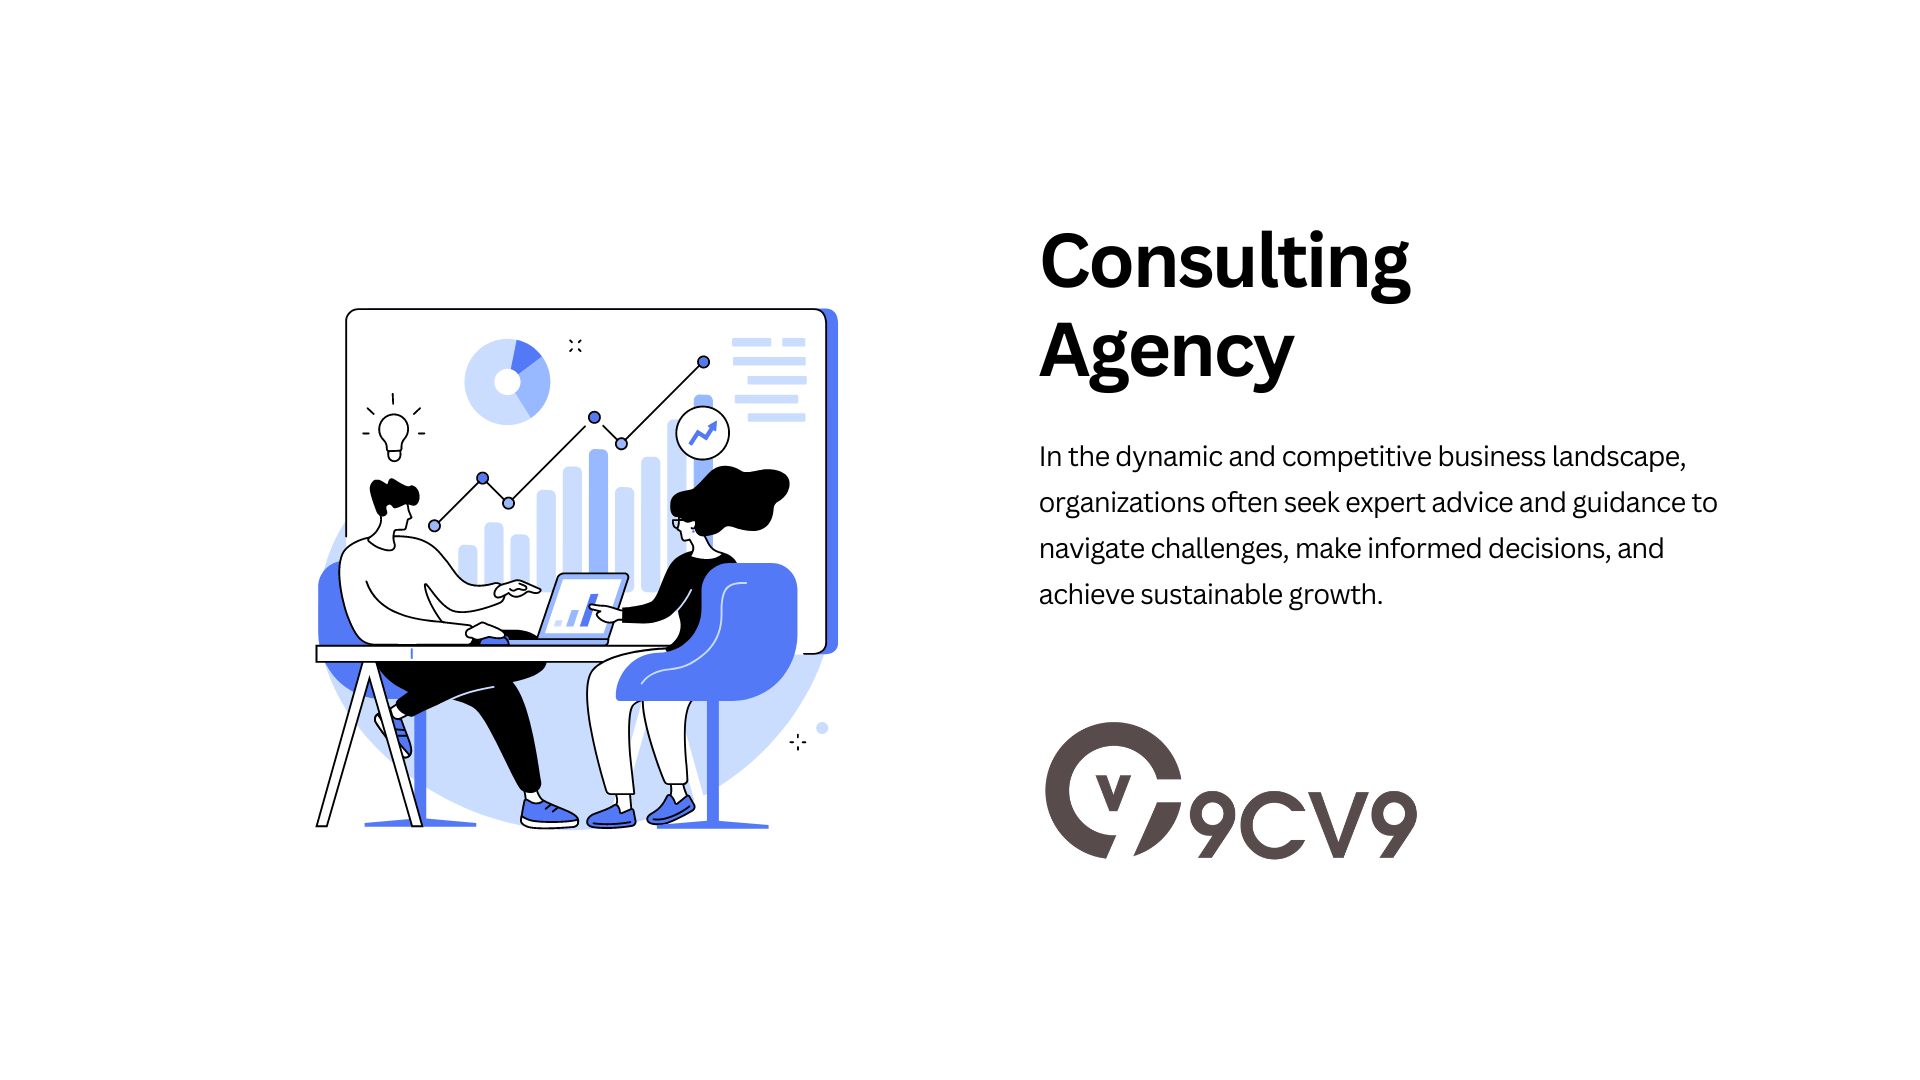 Consulting Agency - Providing Expert Guidance for Business Success